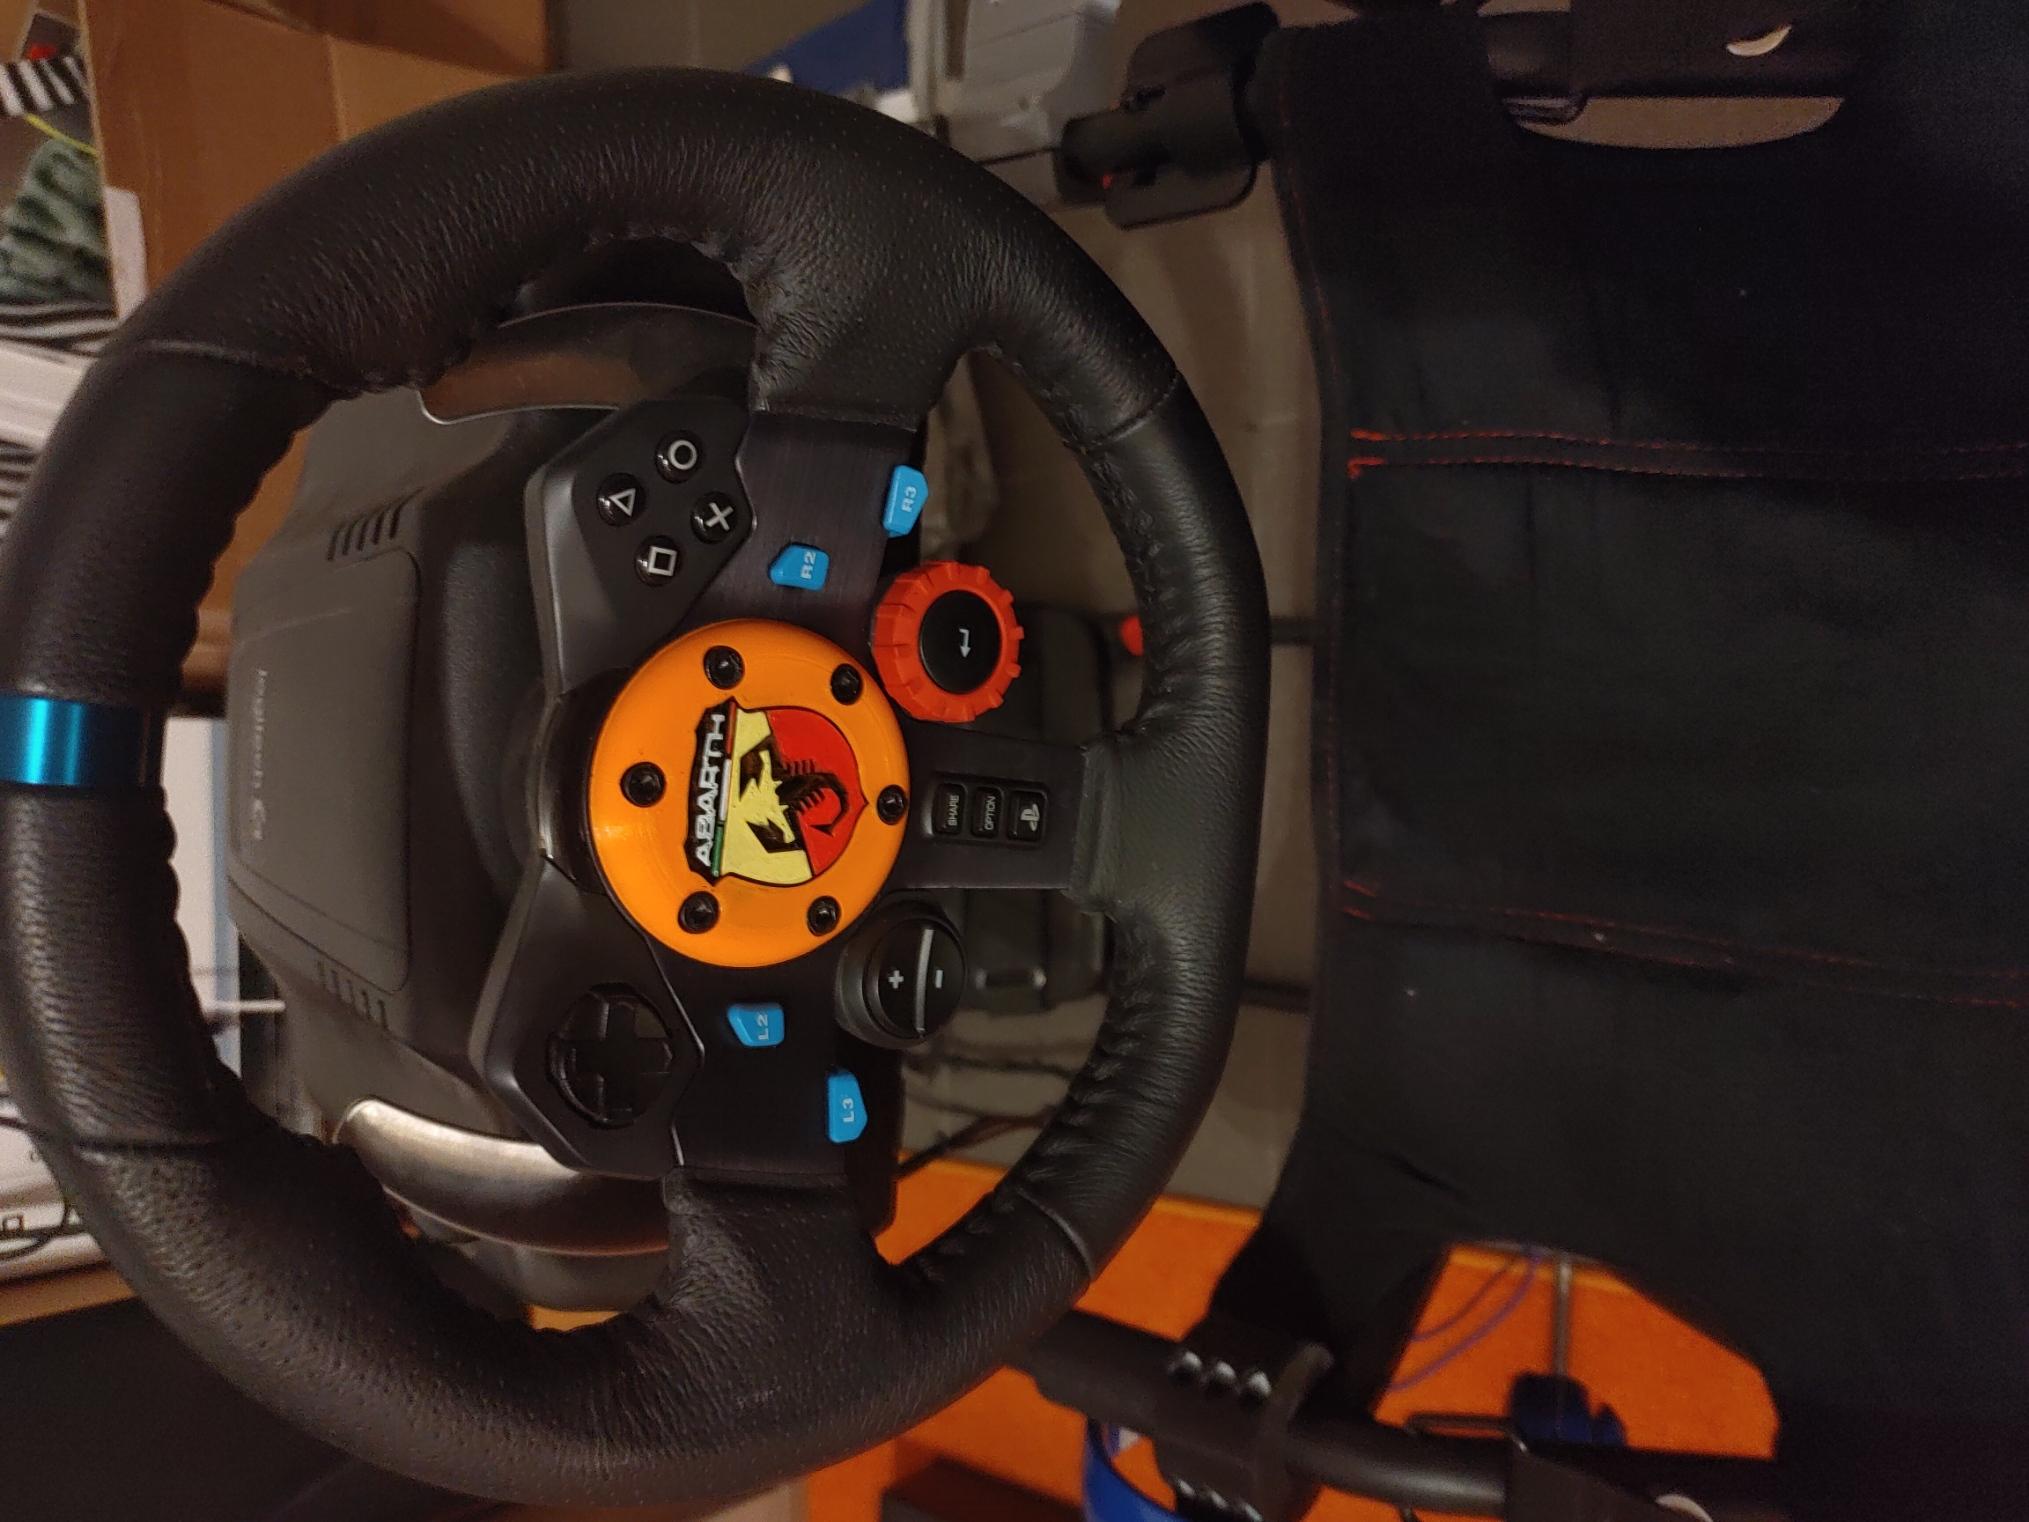 Abarth logo for Logitech G29 - Nice print, used an orange PLA filament and added some colour to the logo. - 3d model